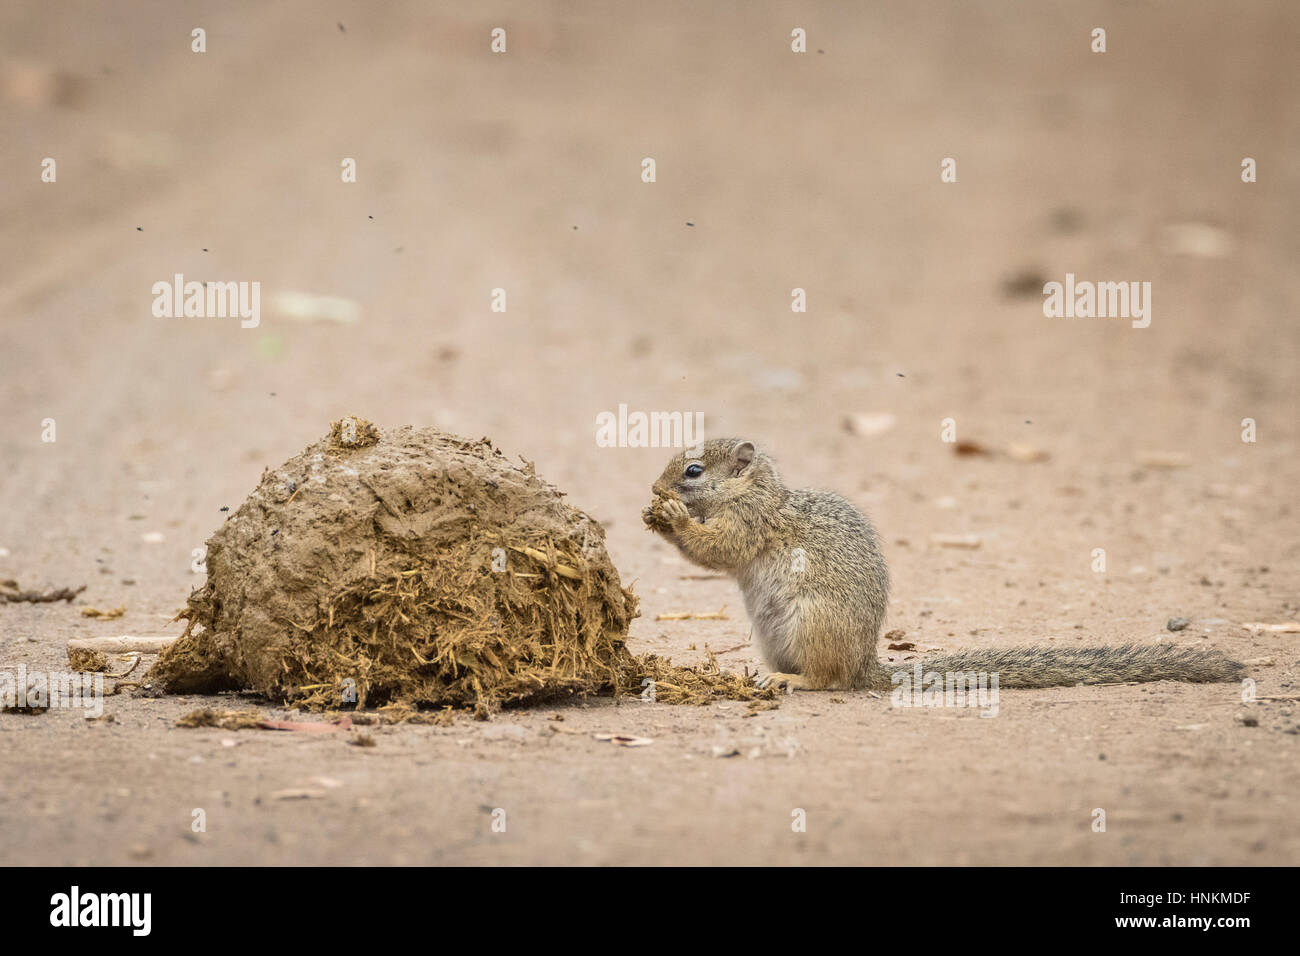 Smith's bush squirrel (Paraxerus cepapi) on elephant dung, Kruger National Park, South Africa Stock Photo